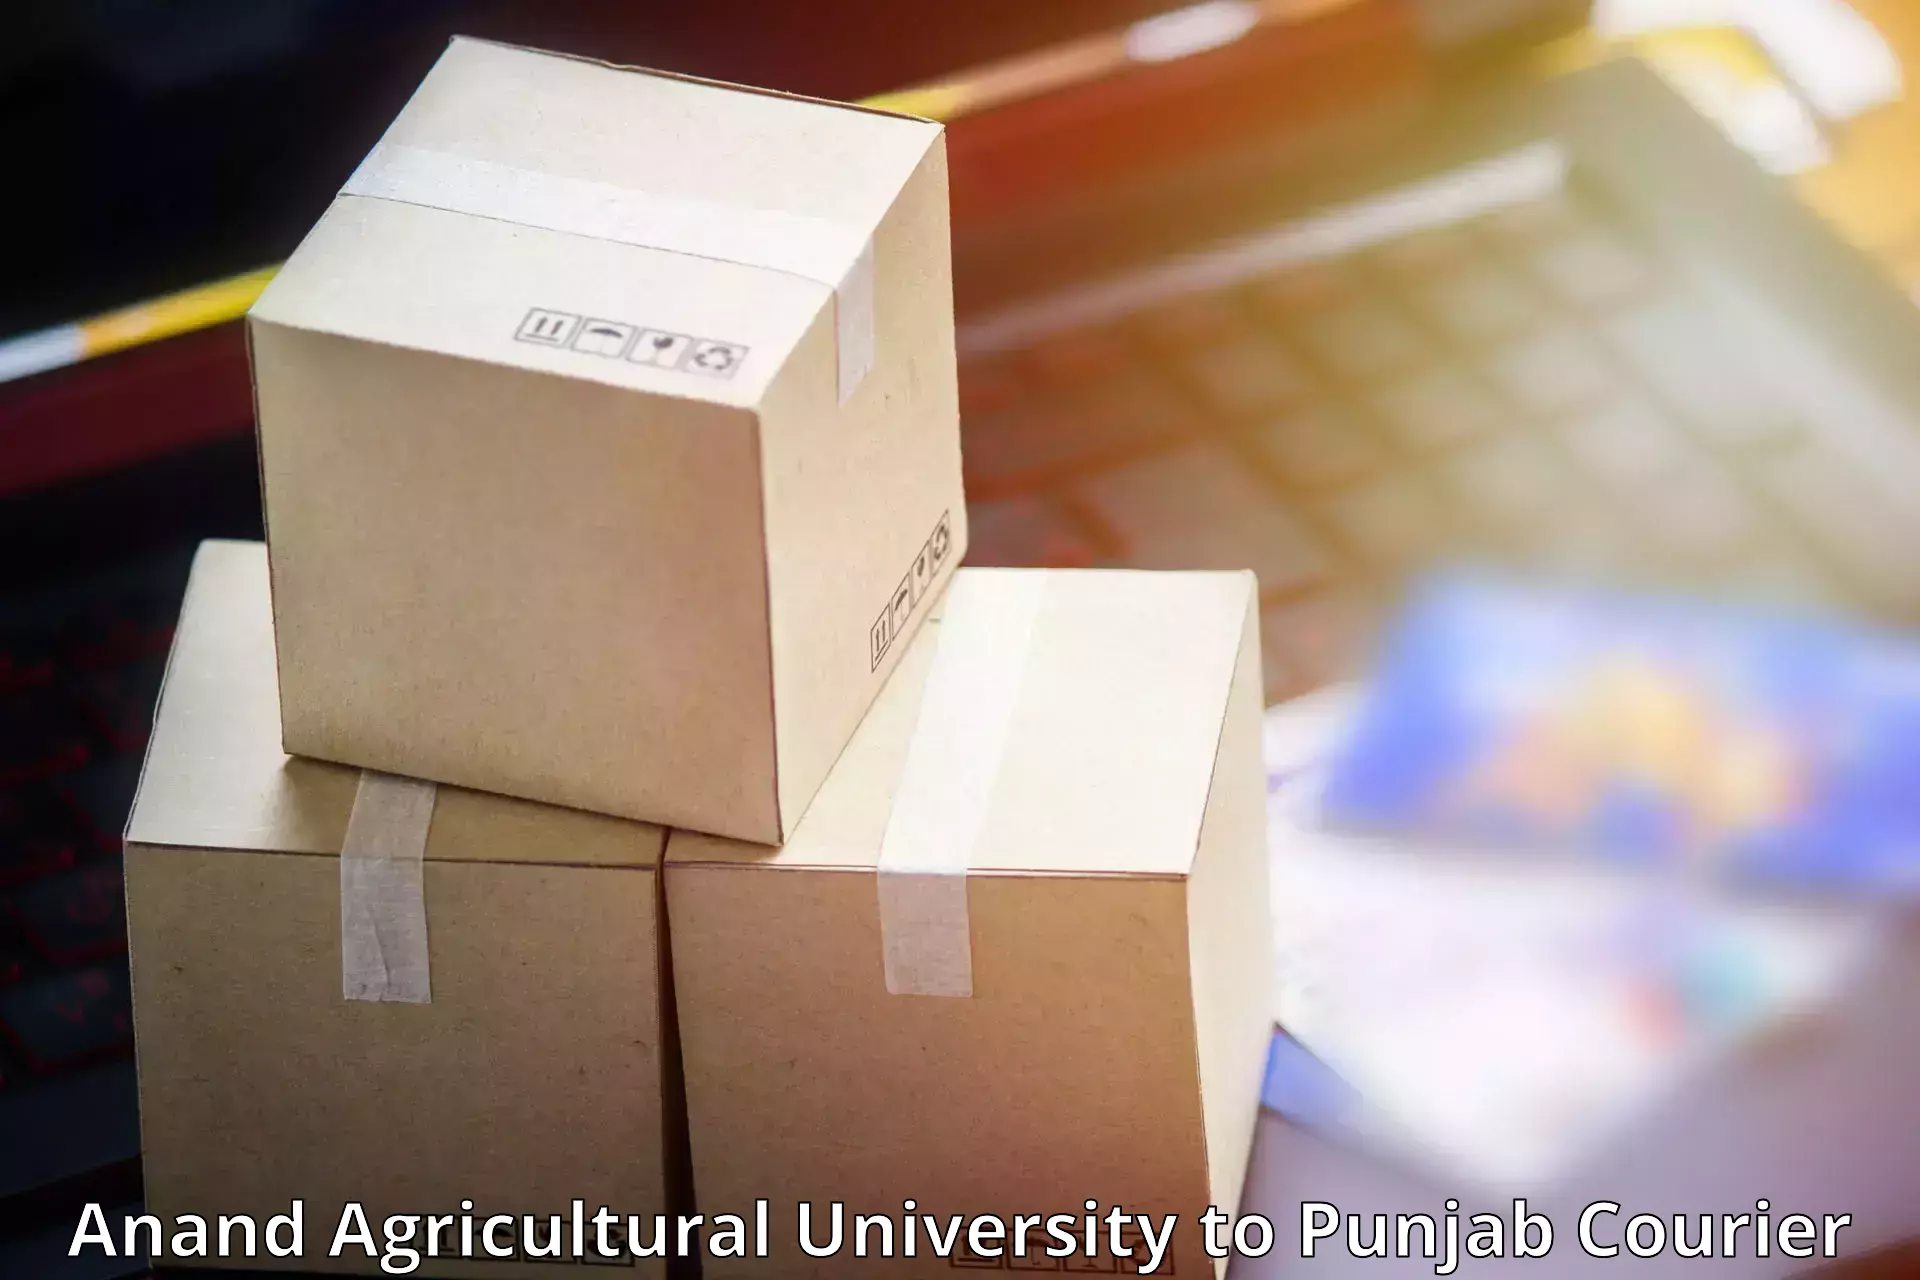 Global parcel delivery Anand Agricultural University to Nawanshahr